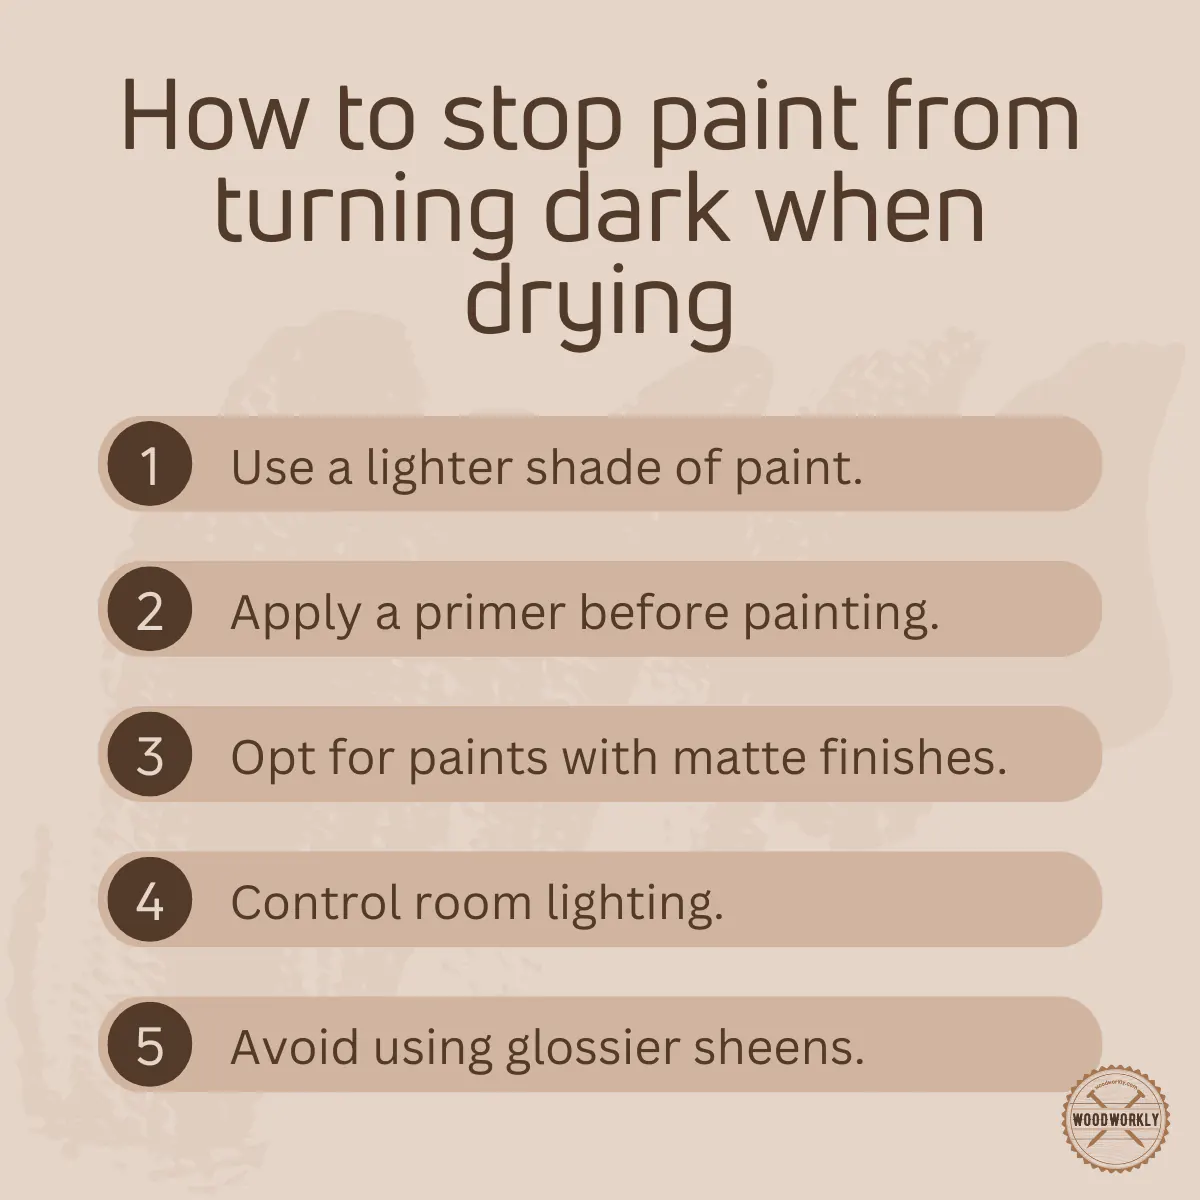 How to stop paint from turning dark when drying